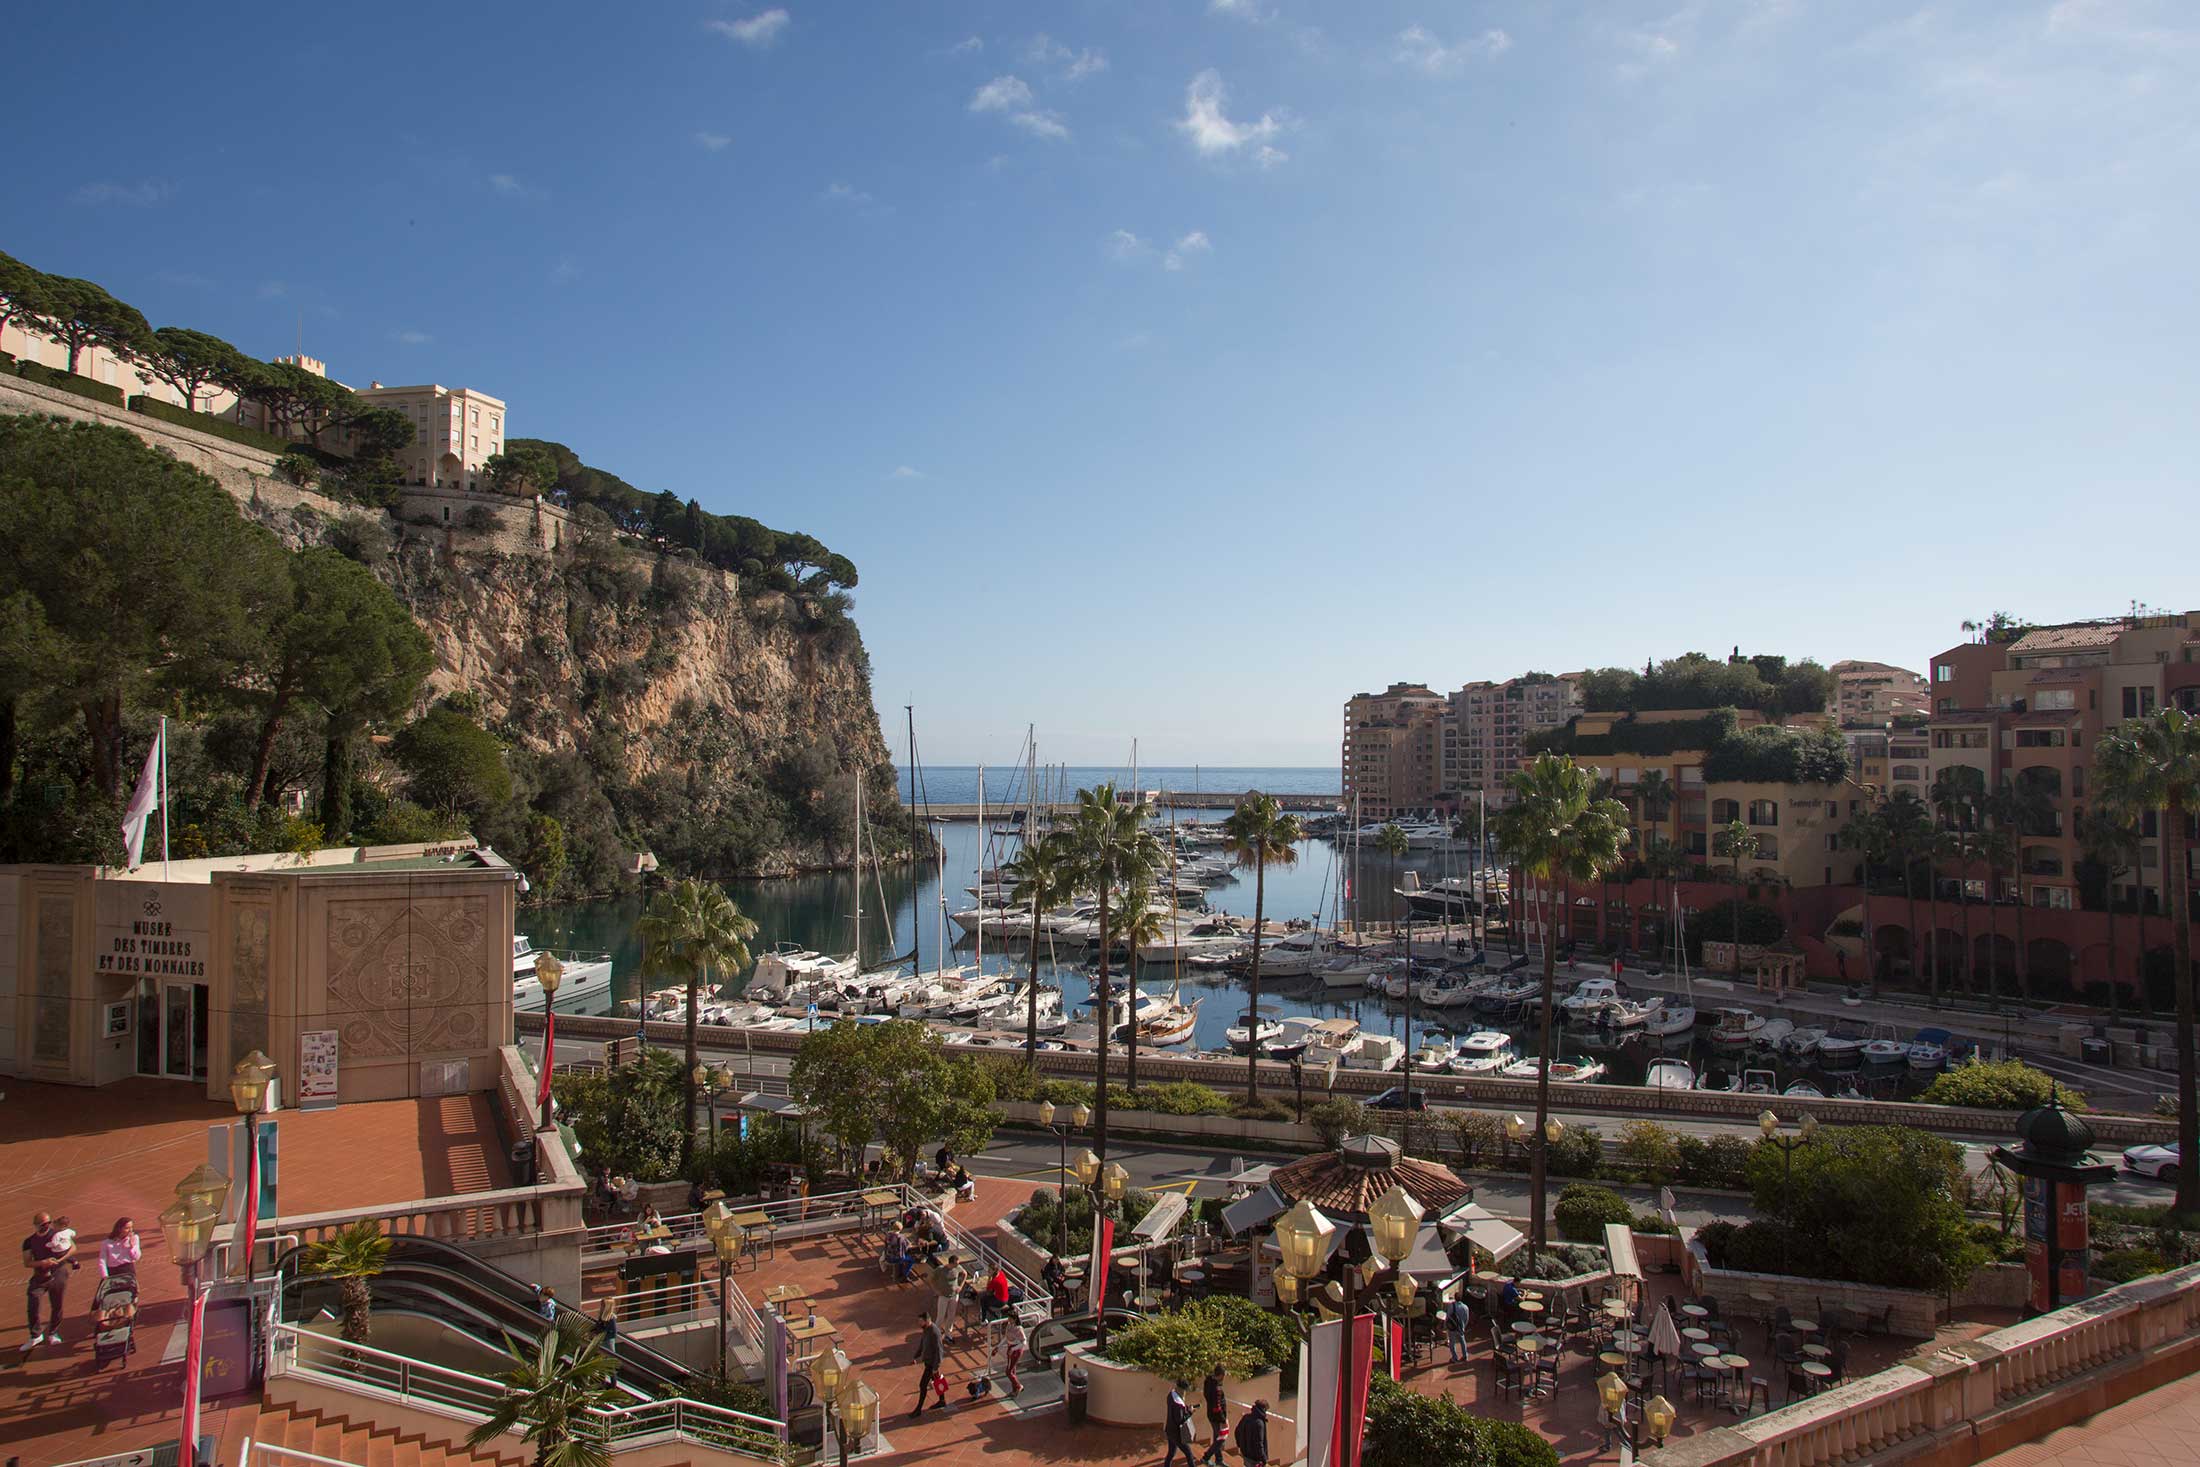 The Prince’s Palace on the top left, overlooking Monaco’s Fontvieille port.